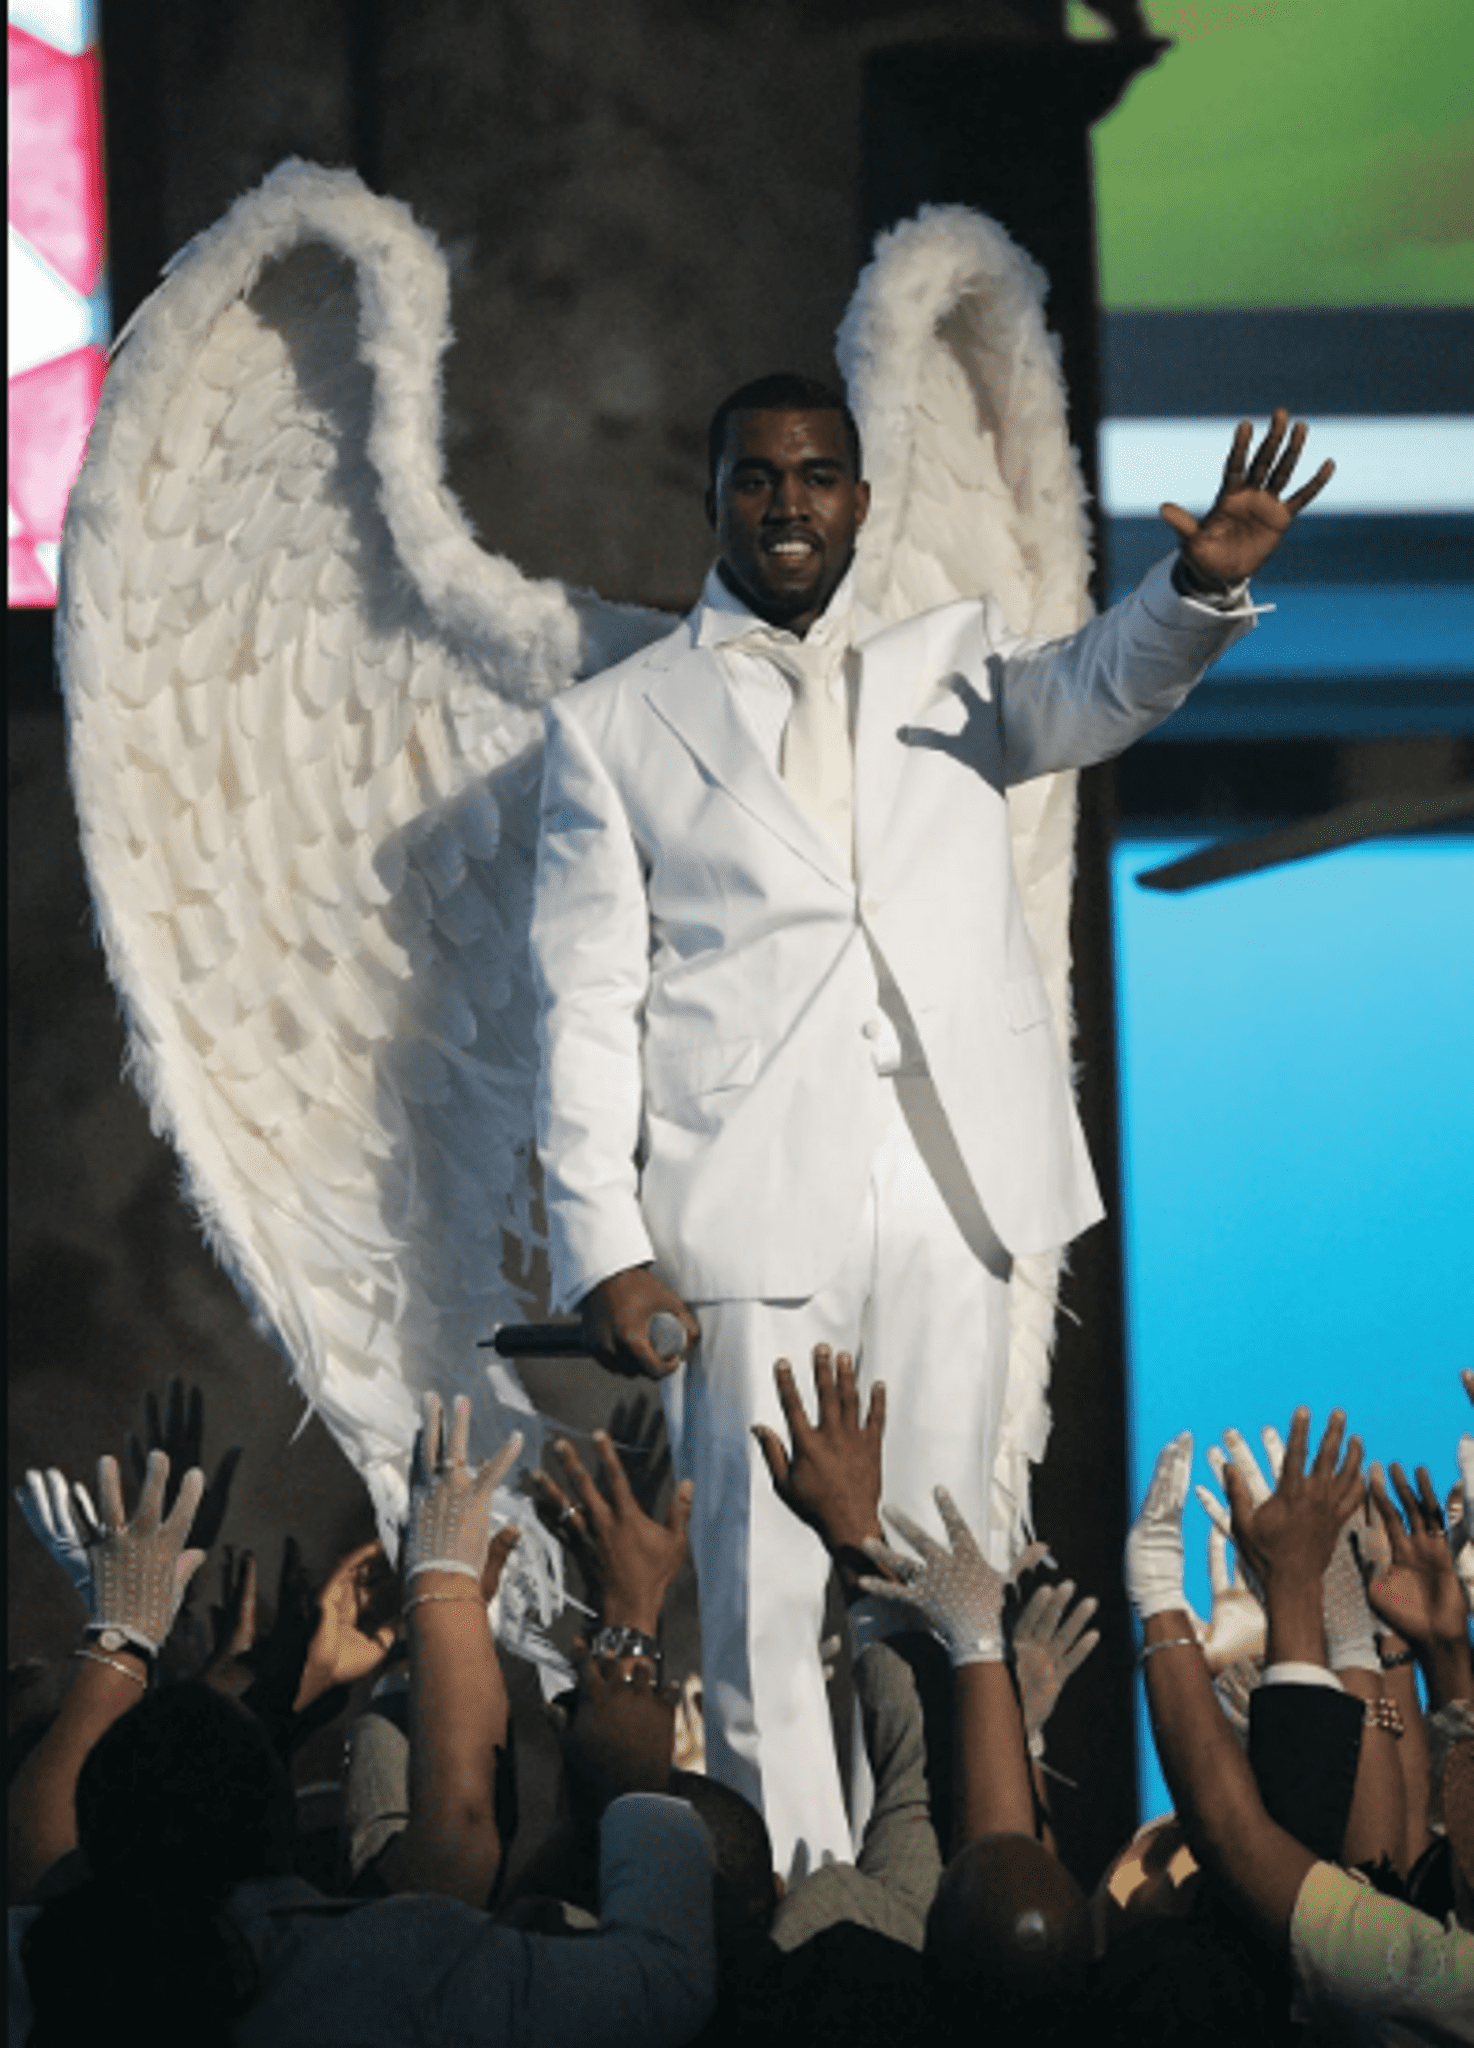 How Kanye West has influenced music, fashion, and society